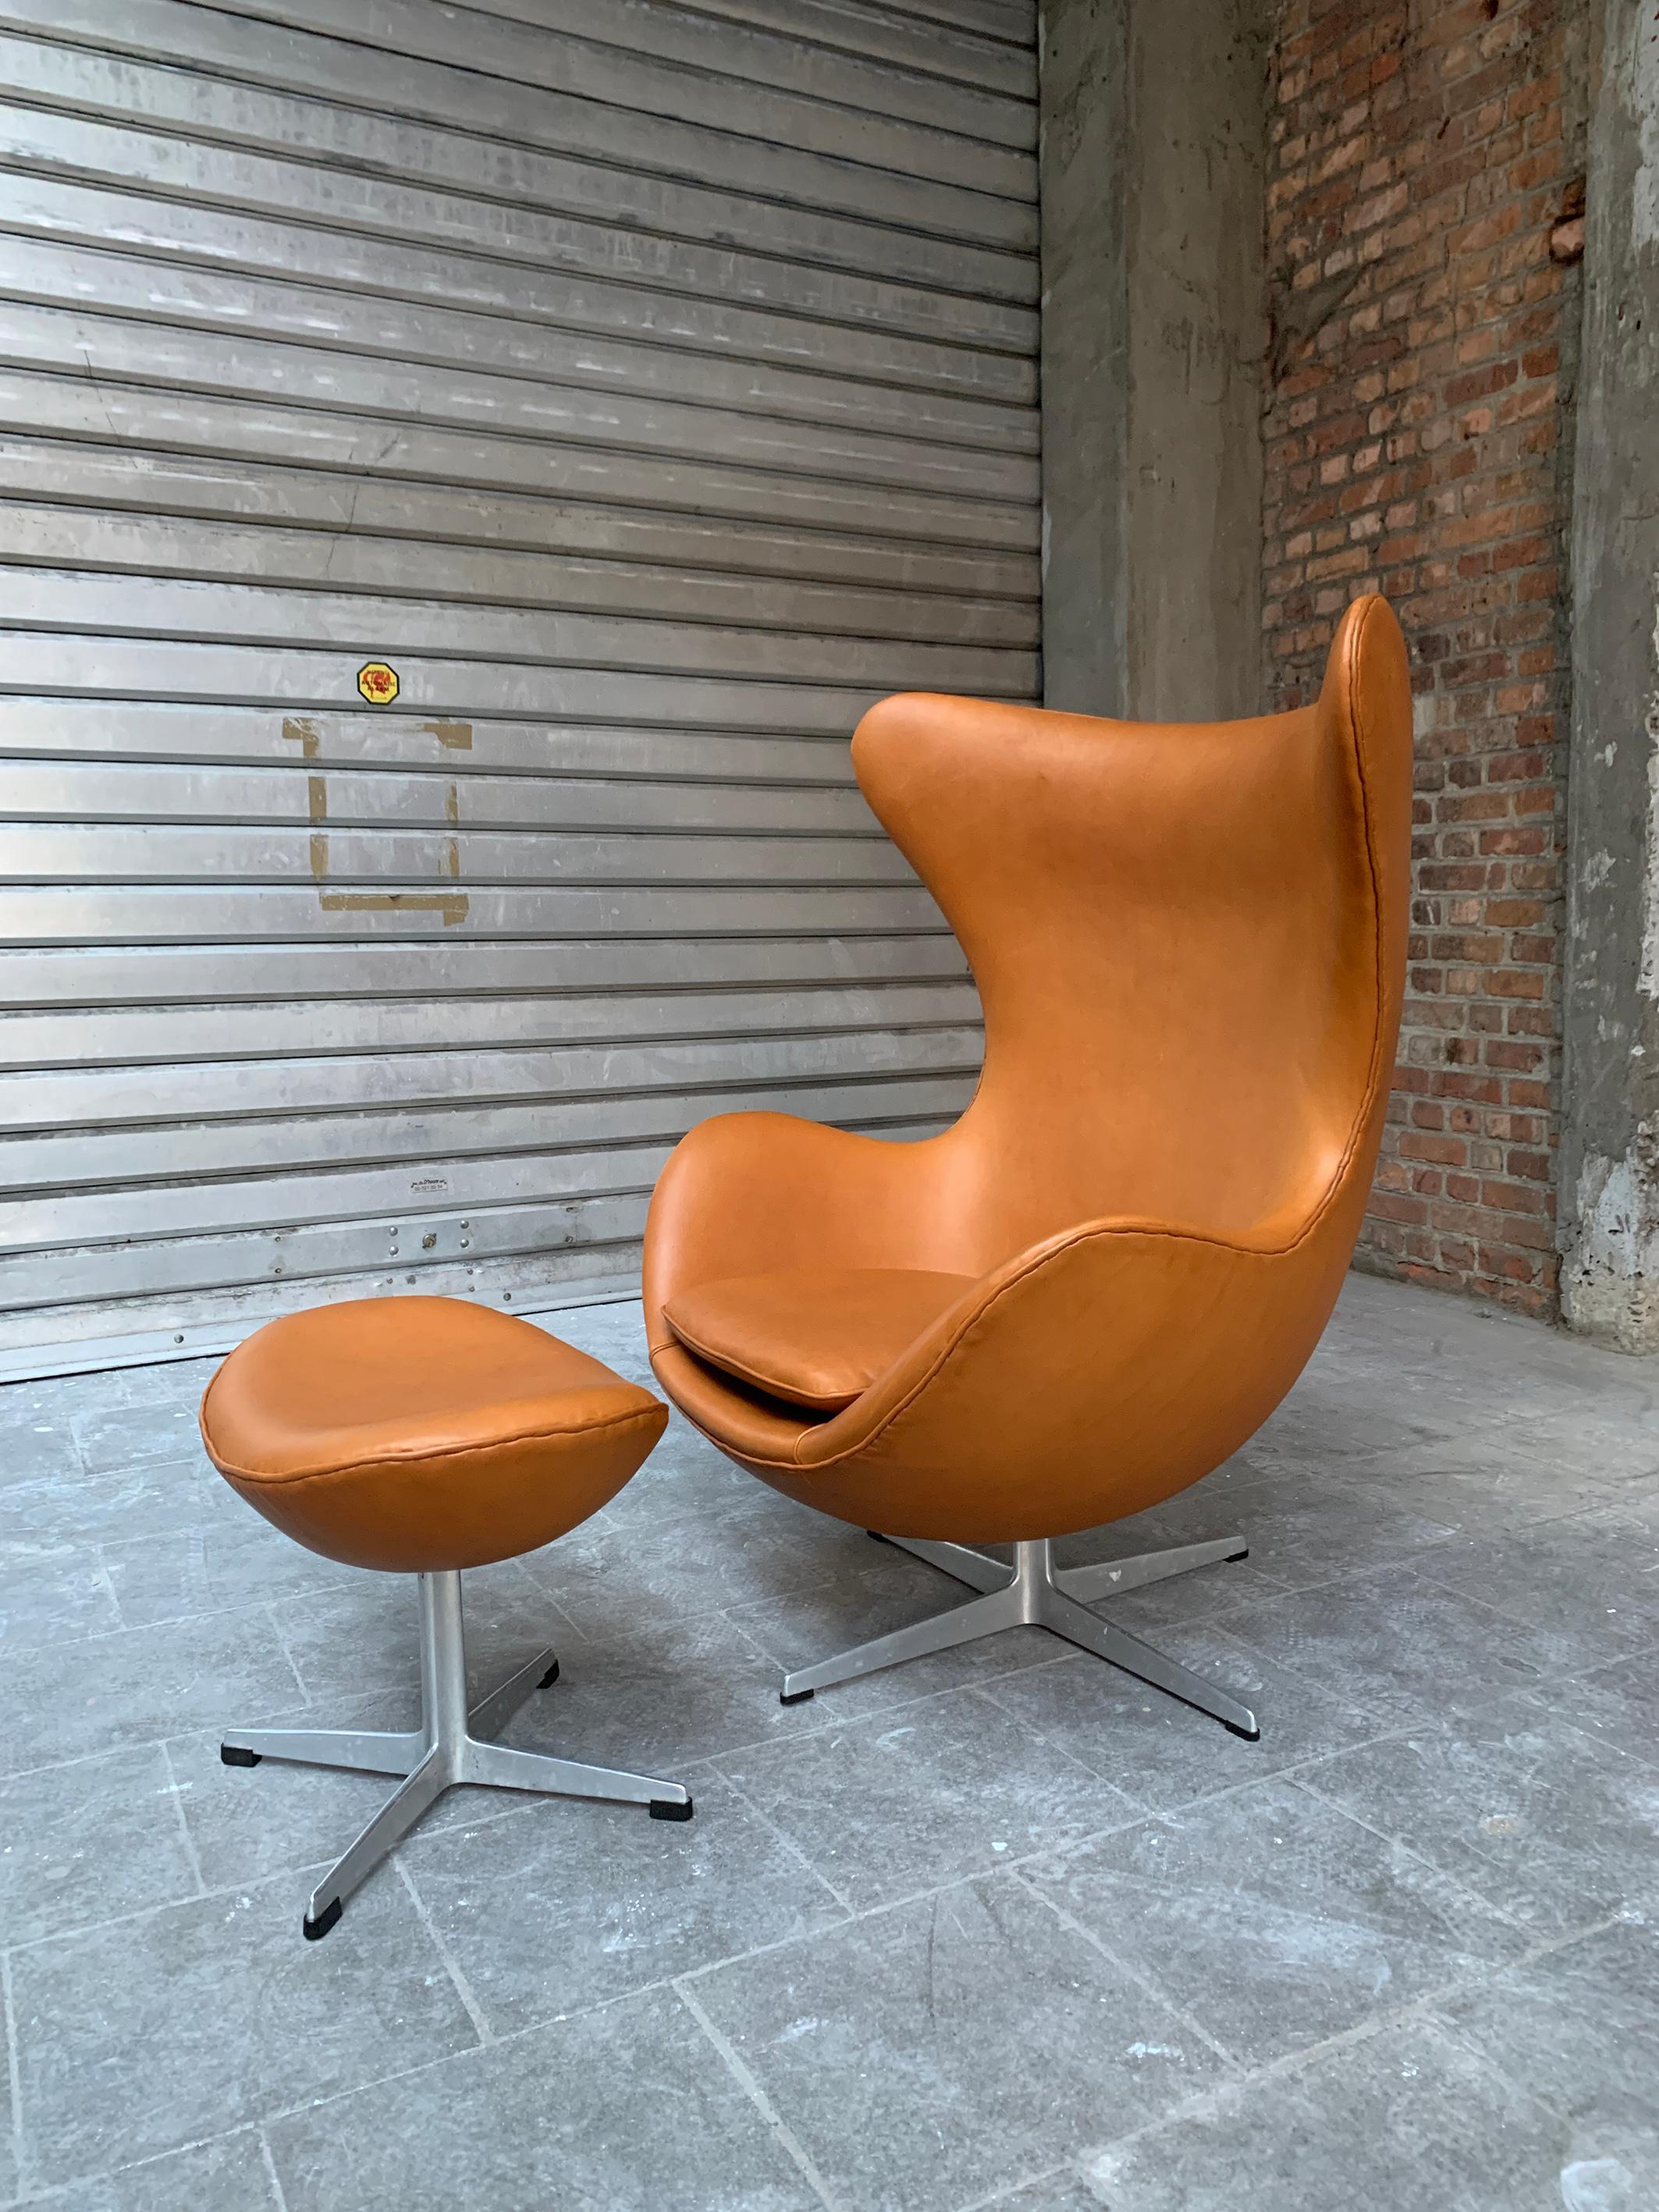 An absolute design-icon, the Egg chair by Arne Jacobsen with it’s footstool produced in 1966. 

Newly reupholstered in European Nappa leather by using the original techniques. This means manual stitching of the leather piping all around the chair